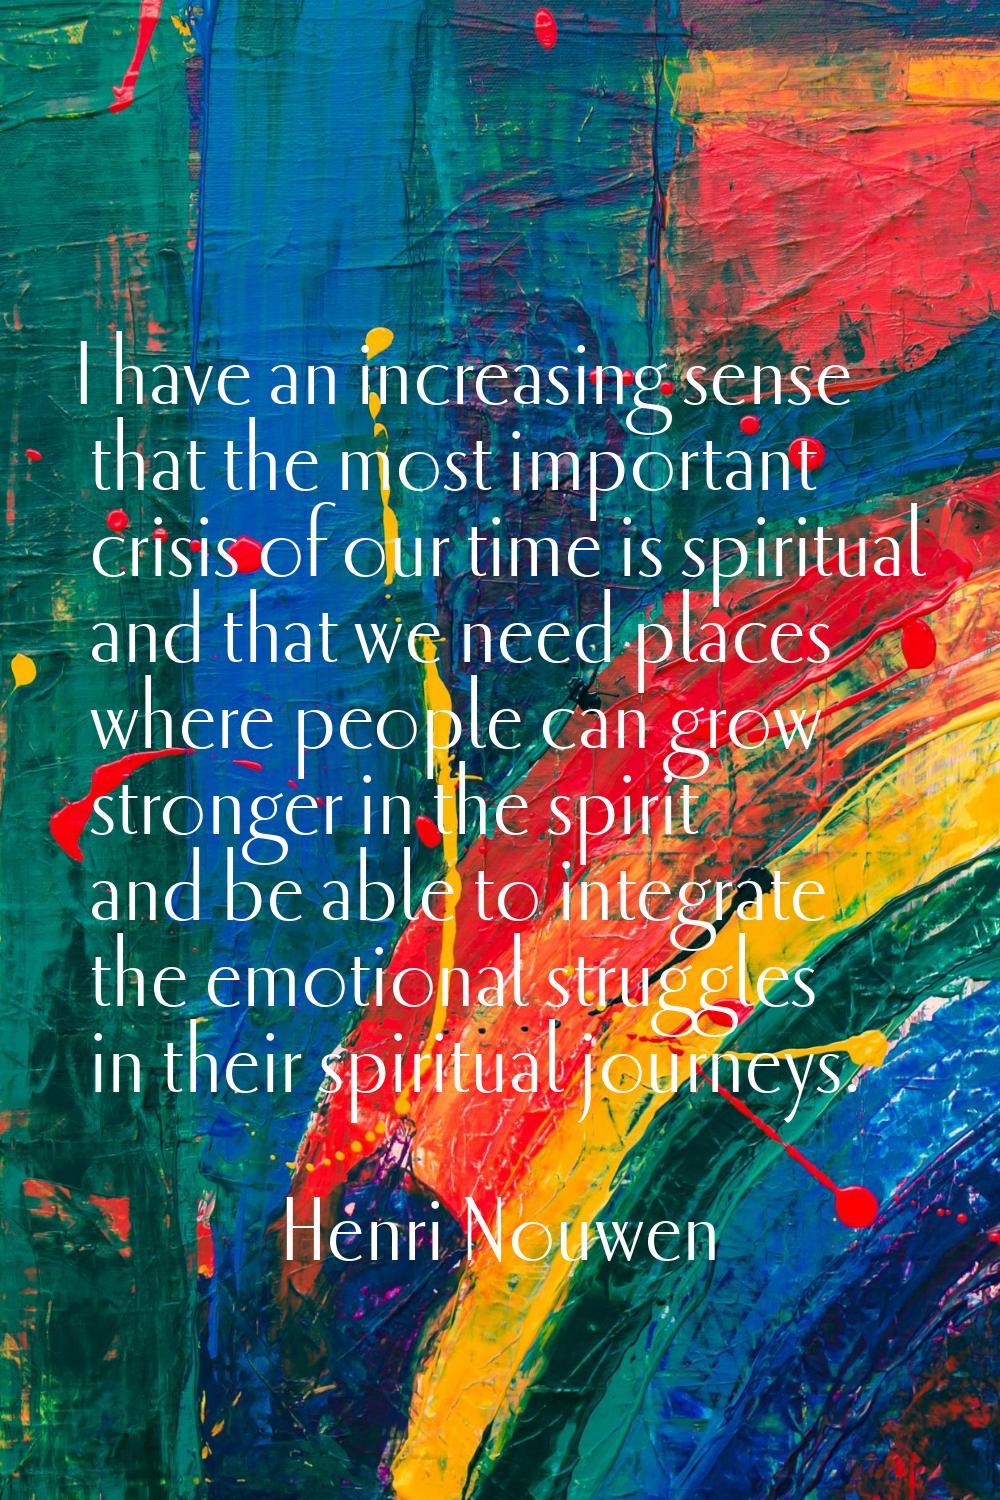 I have an increasing sense that the most important crisis of our time is spiritual and that we need